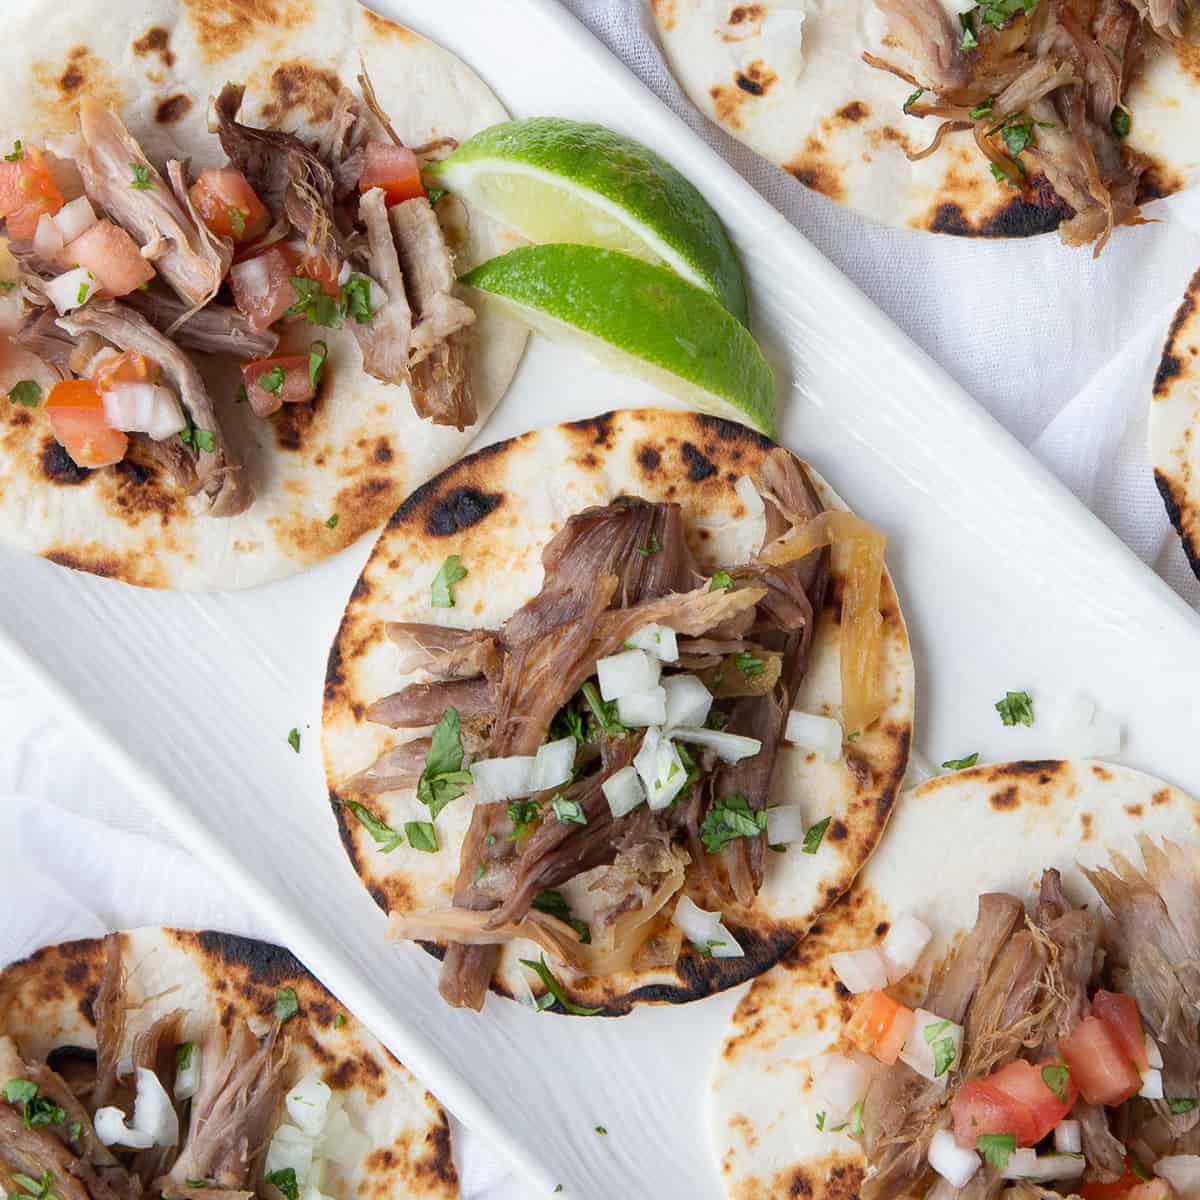 carnitas on top of mini tortillas on a white rectangular platter, garnished with lime slices.